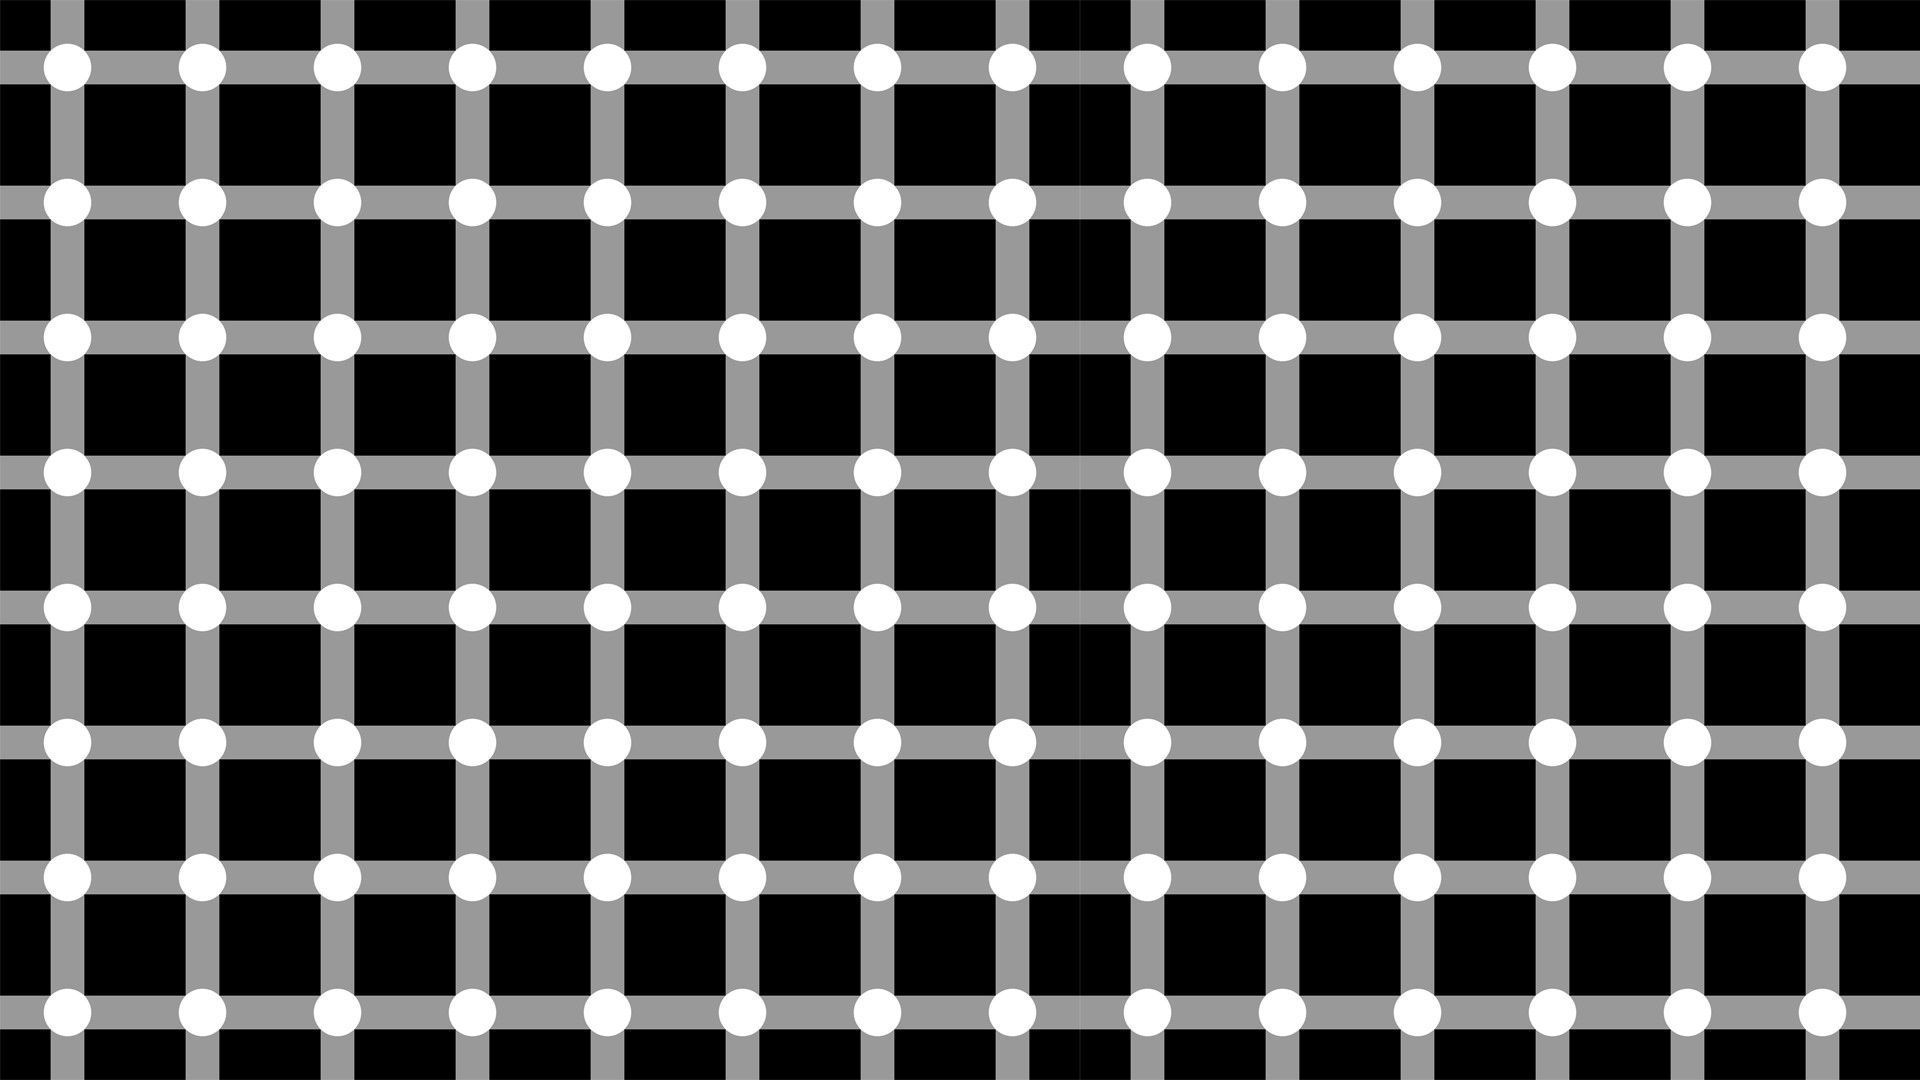 Patterns textures grid illusions grayscale optical illusions grid ...